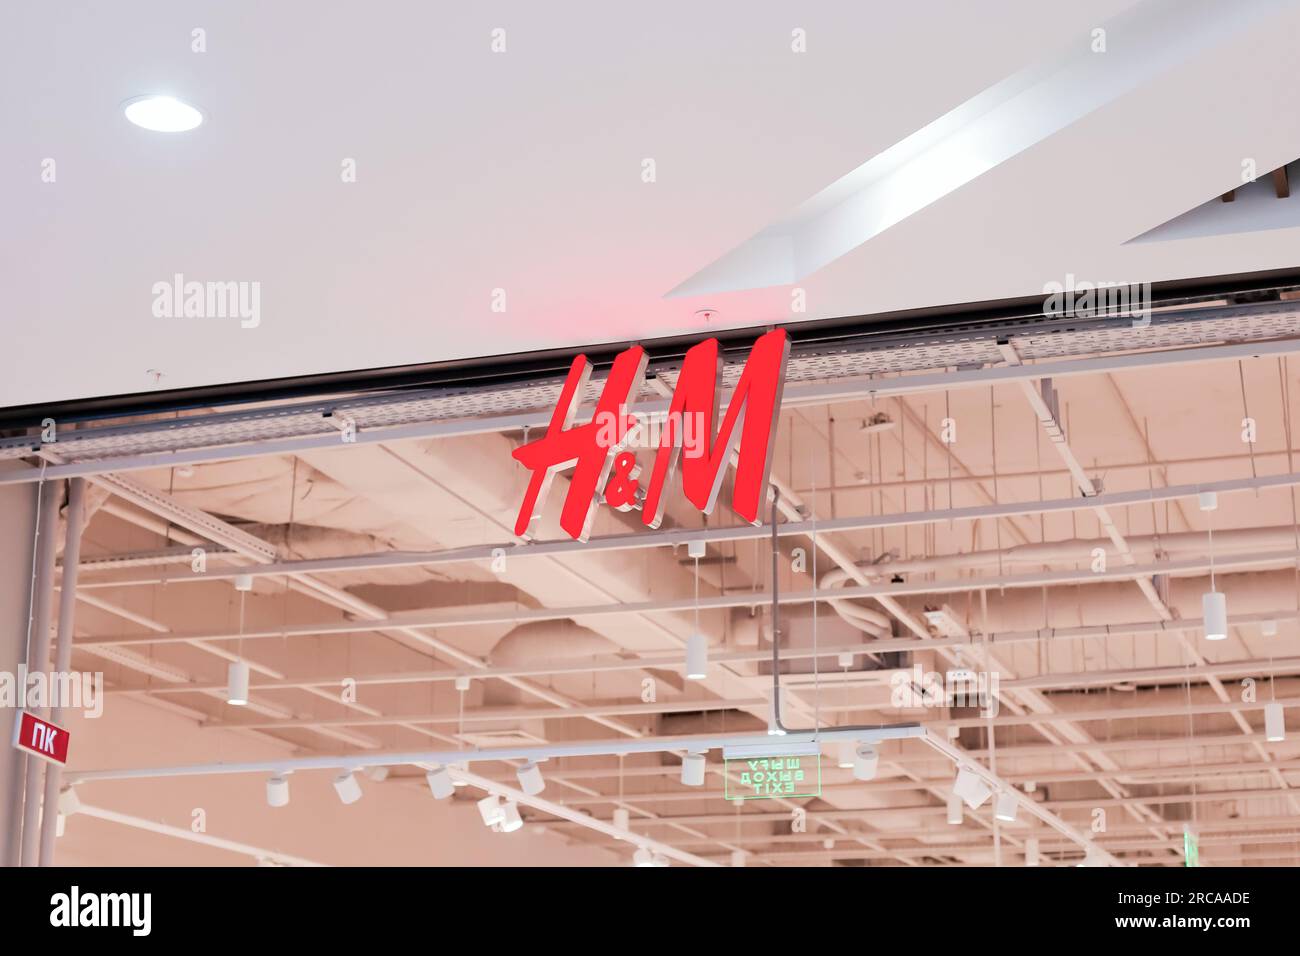 logo of Hennes and Mauritz, hm, H and M on ceiling. Pavlodar, Kazakhstan - 12.28.2022 Stock Photo